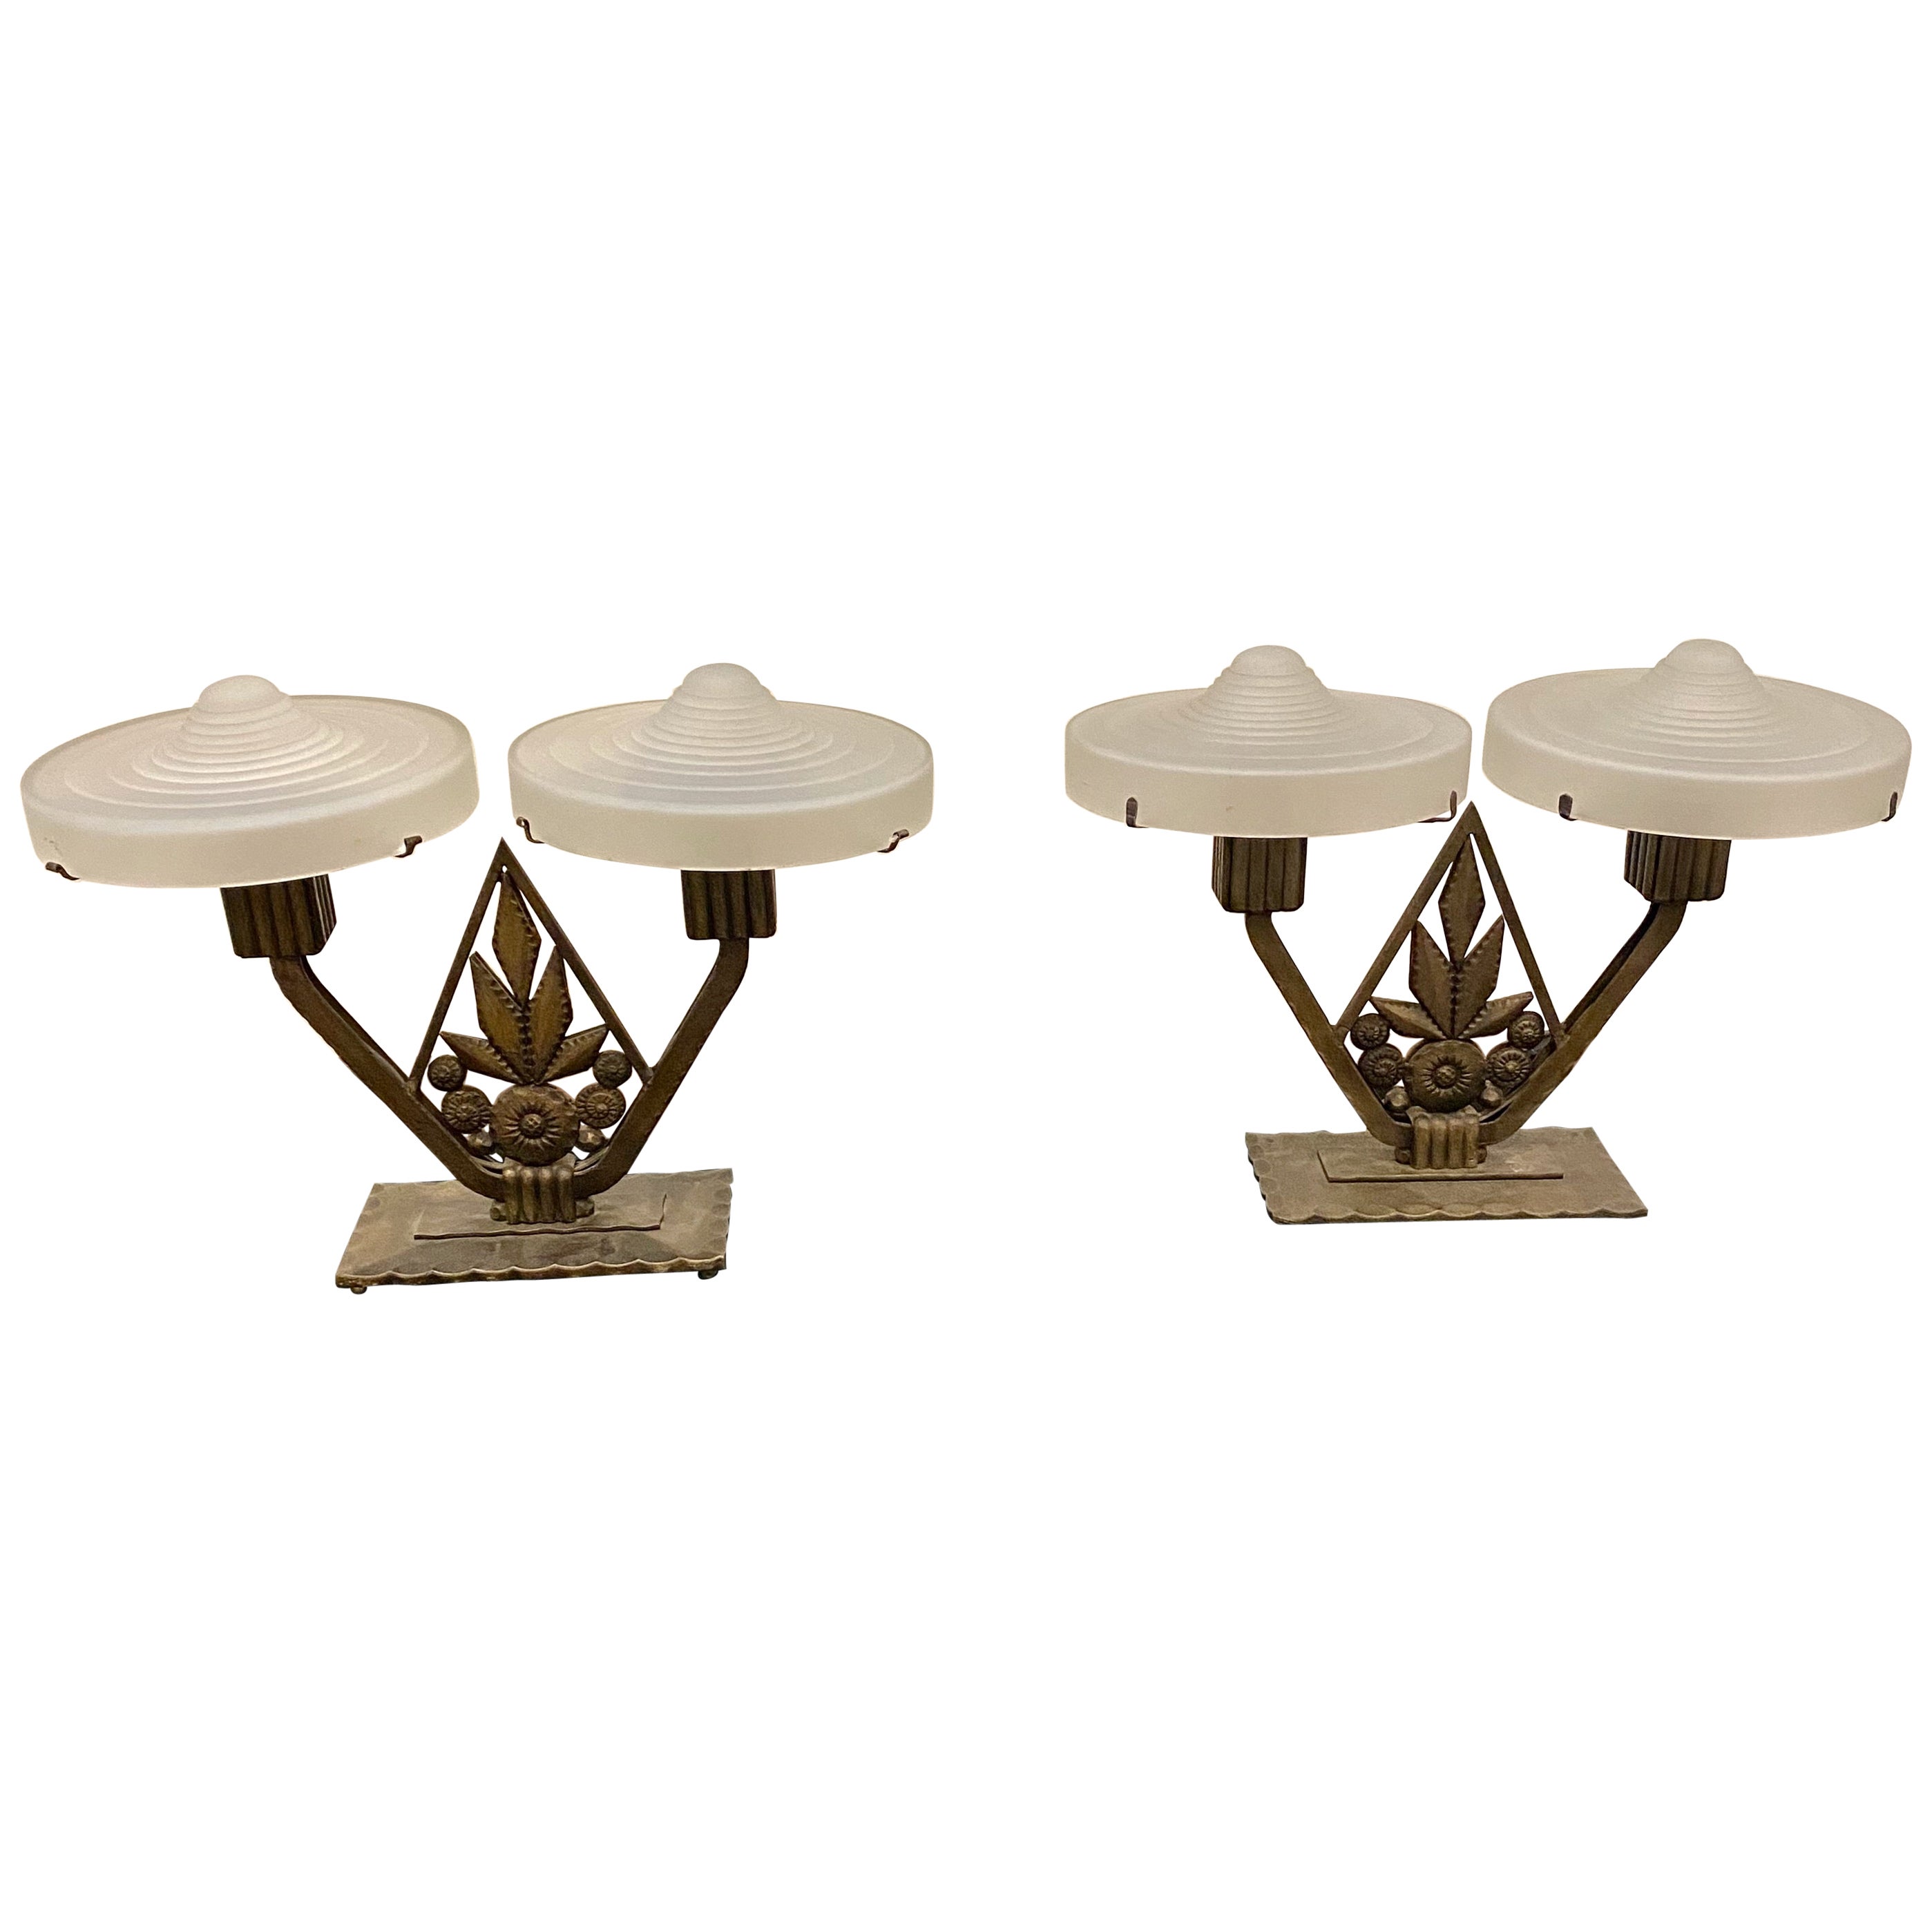 Pair of French Art Deco Table Lamps with Geometric Motif